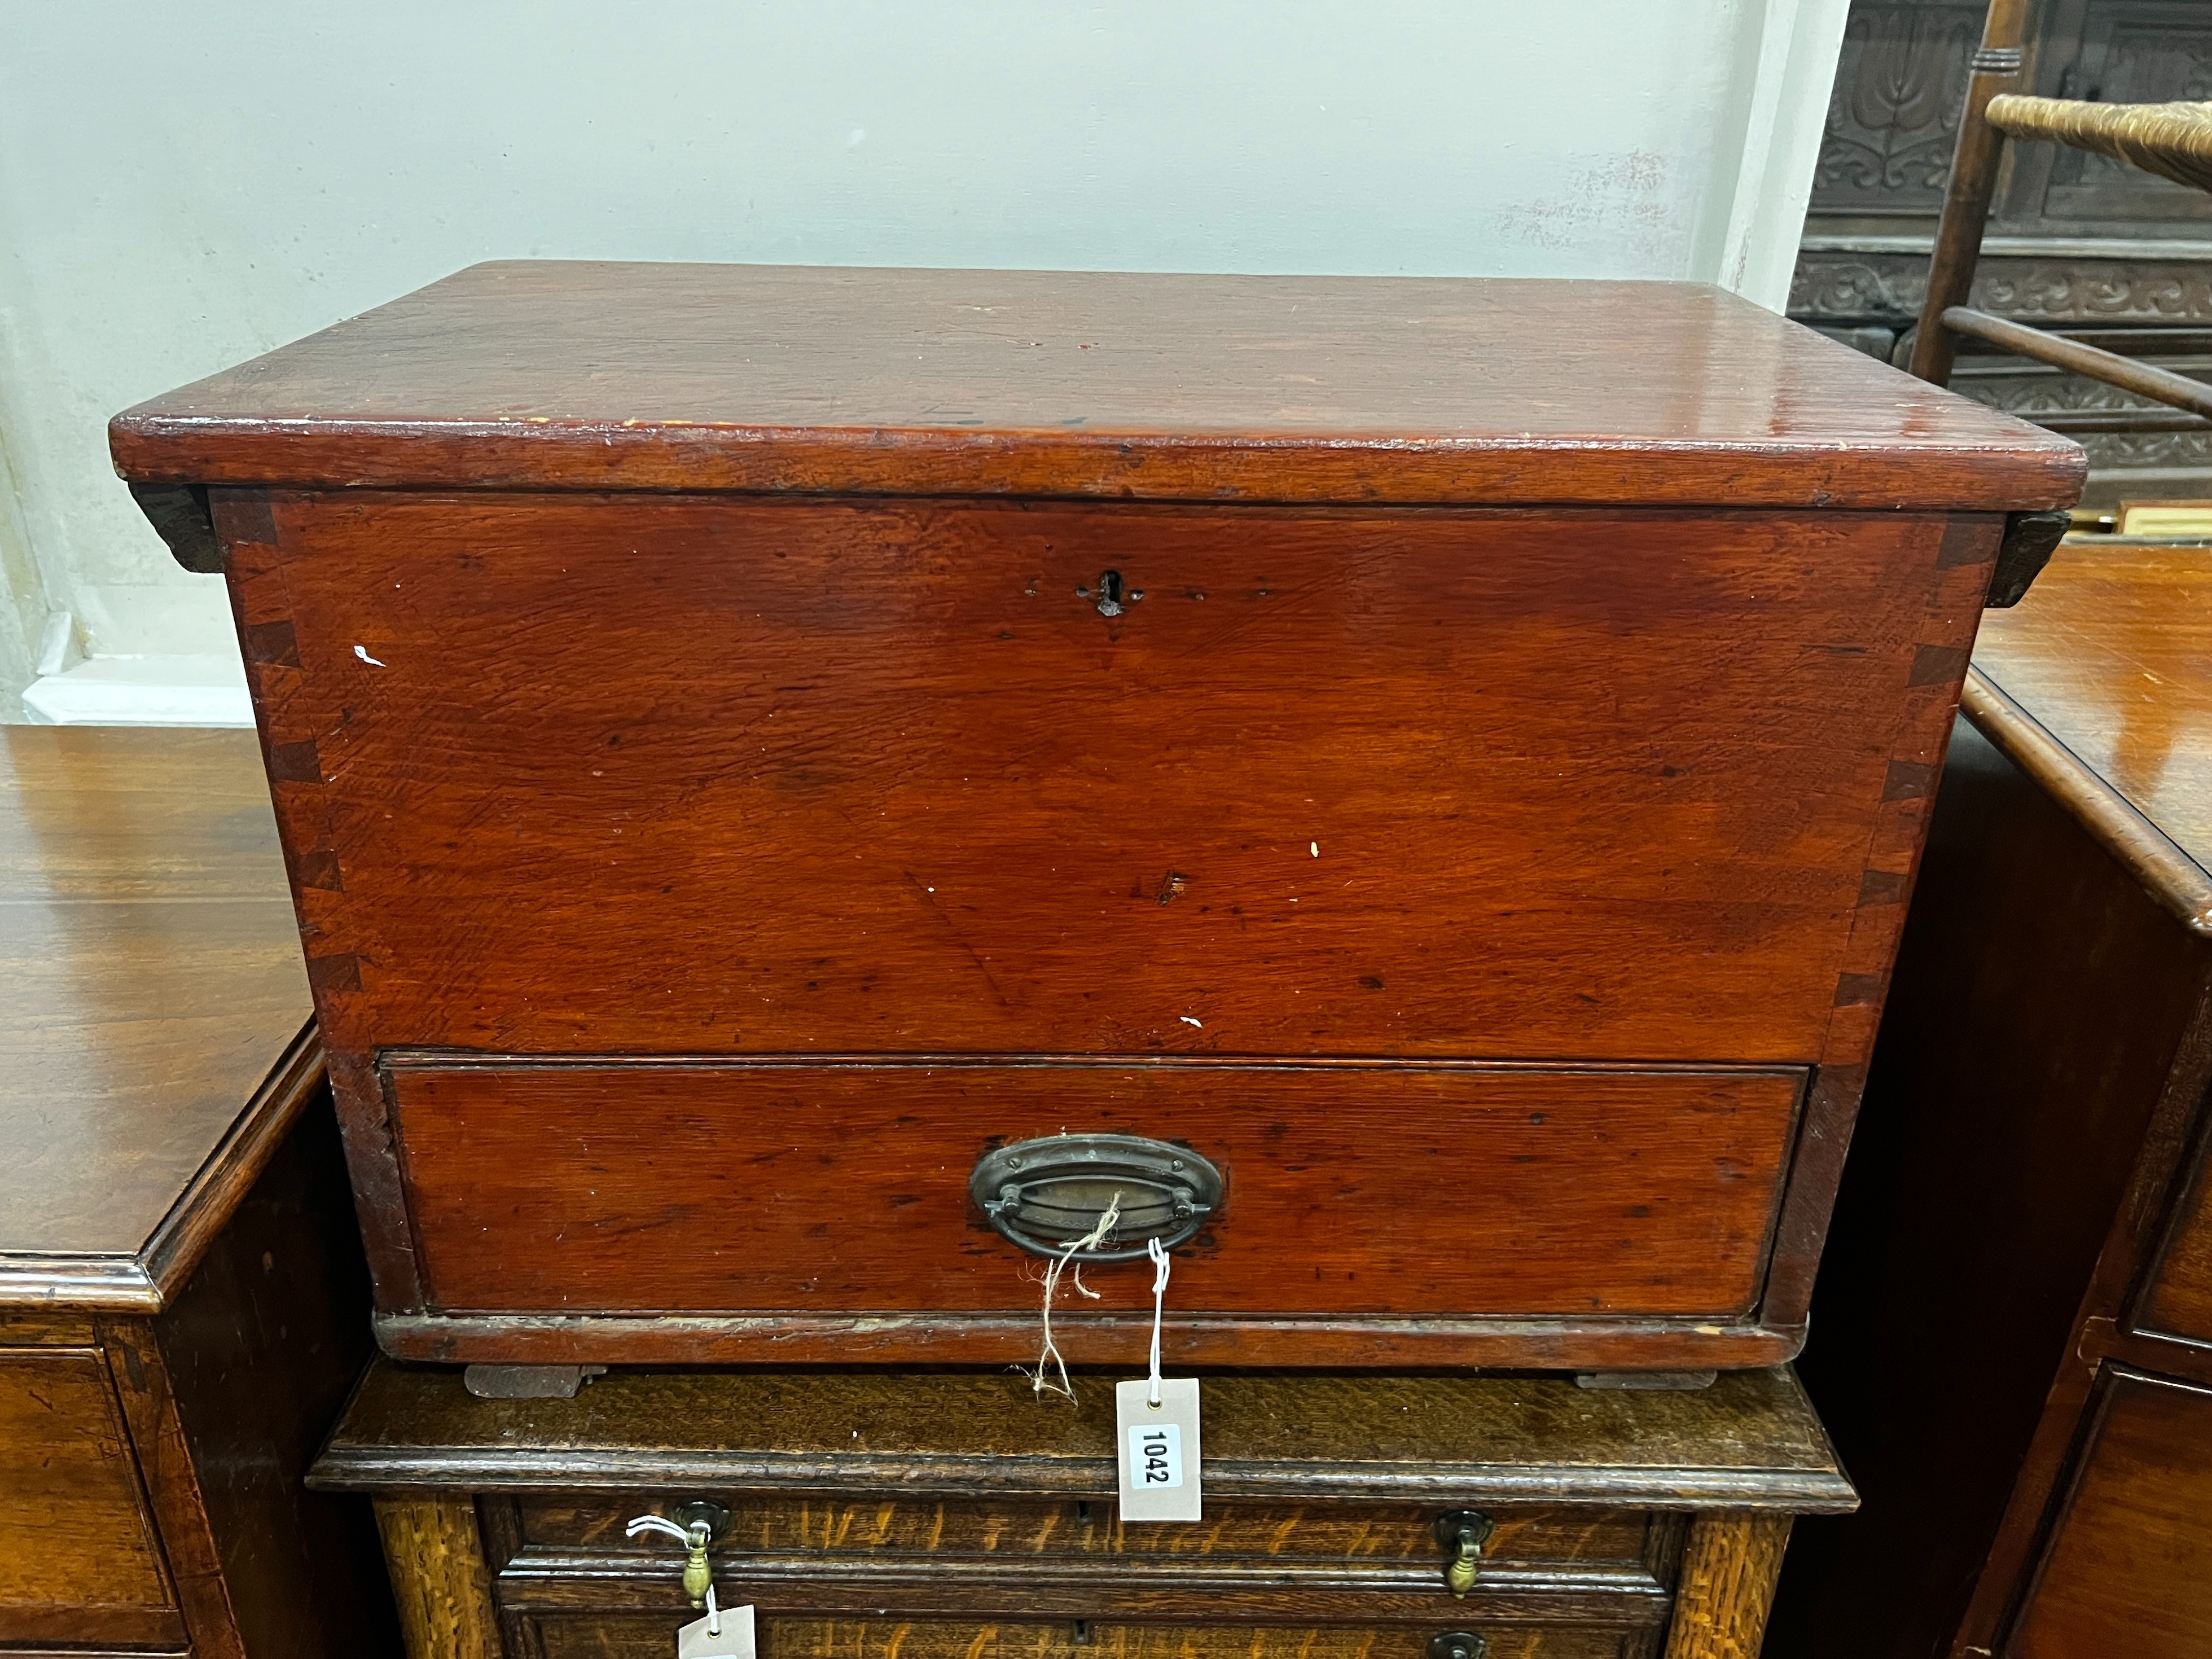 A Victorian pine carpenter's chest with painted grain, width 69cm, depth 41cm, height 45cm